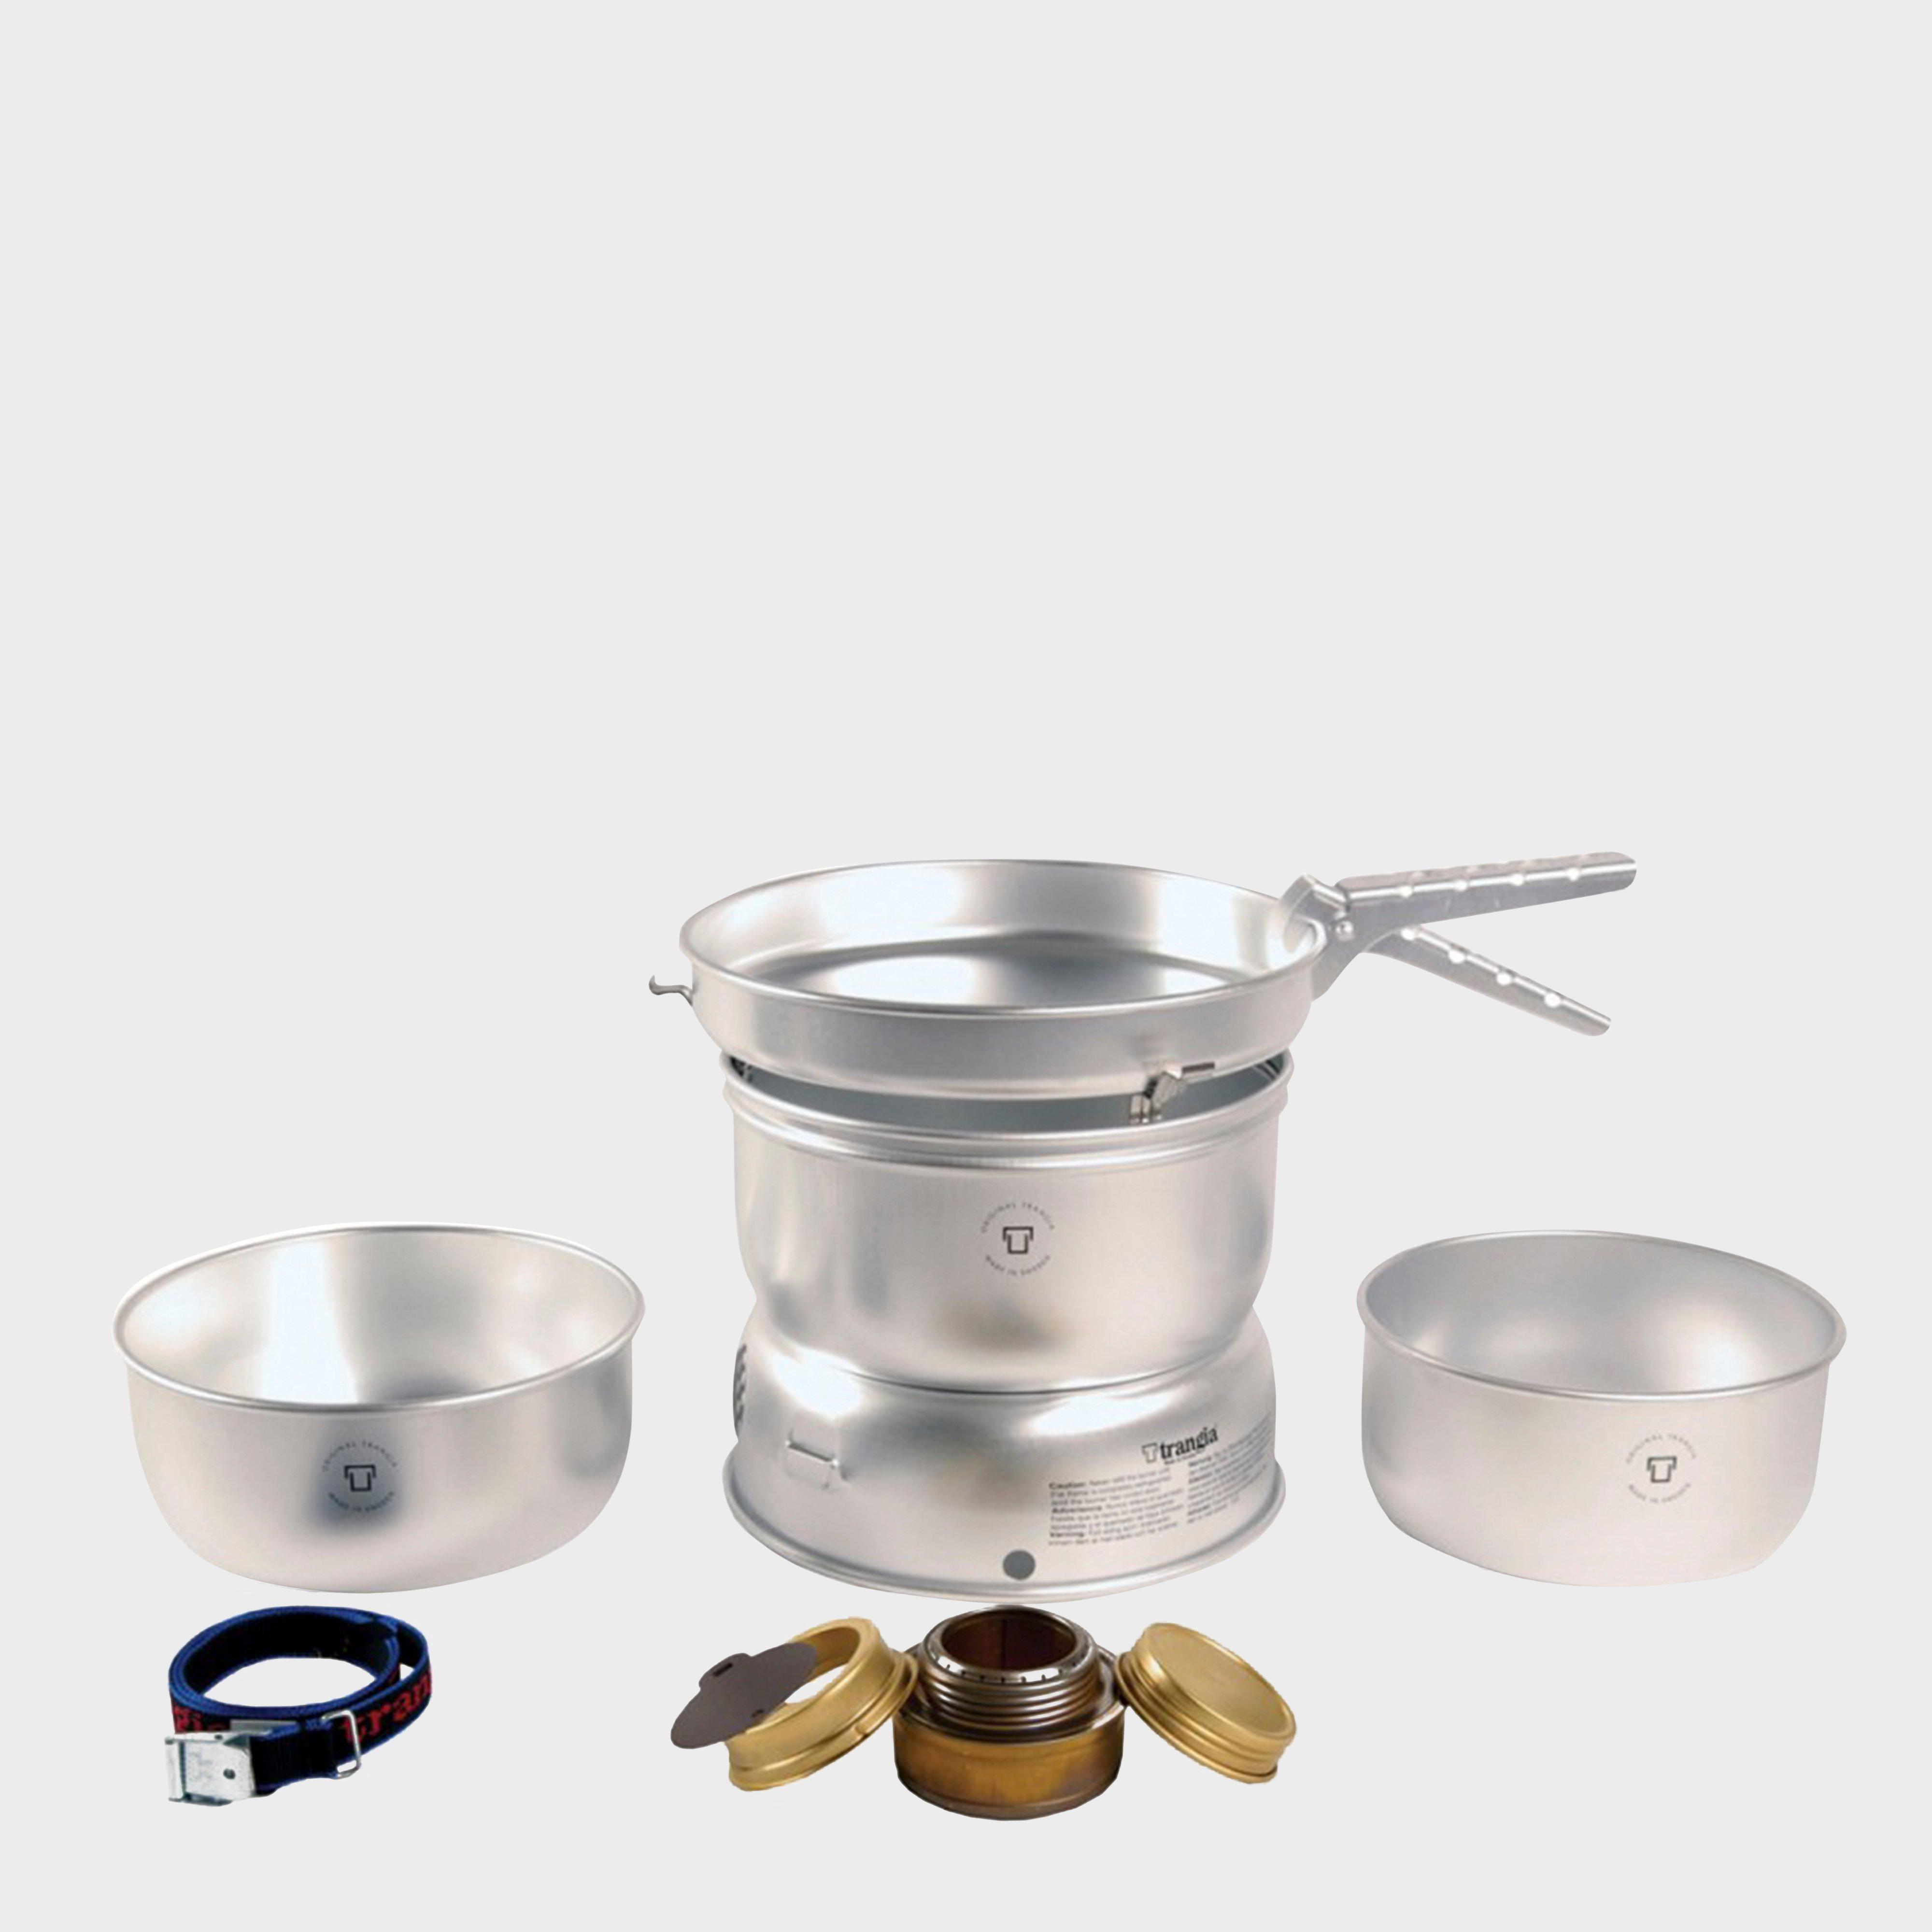 25-1 Camping Cooking System - Silver, Silver